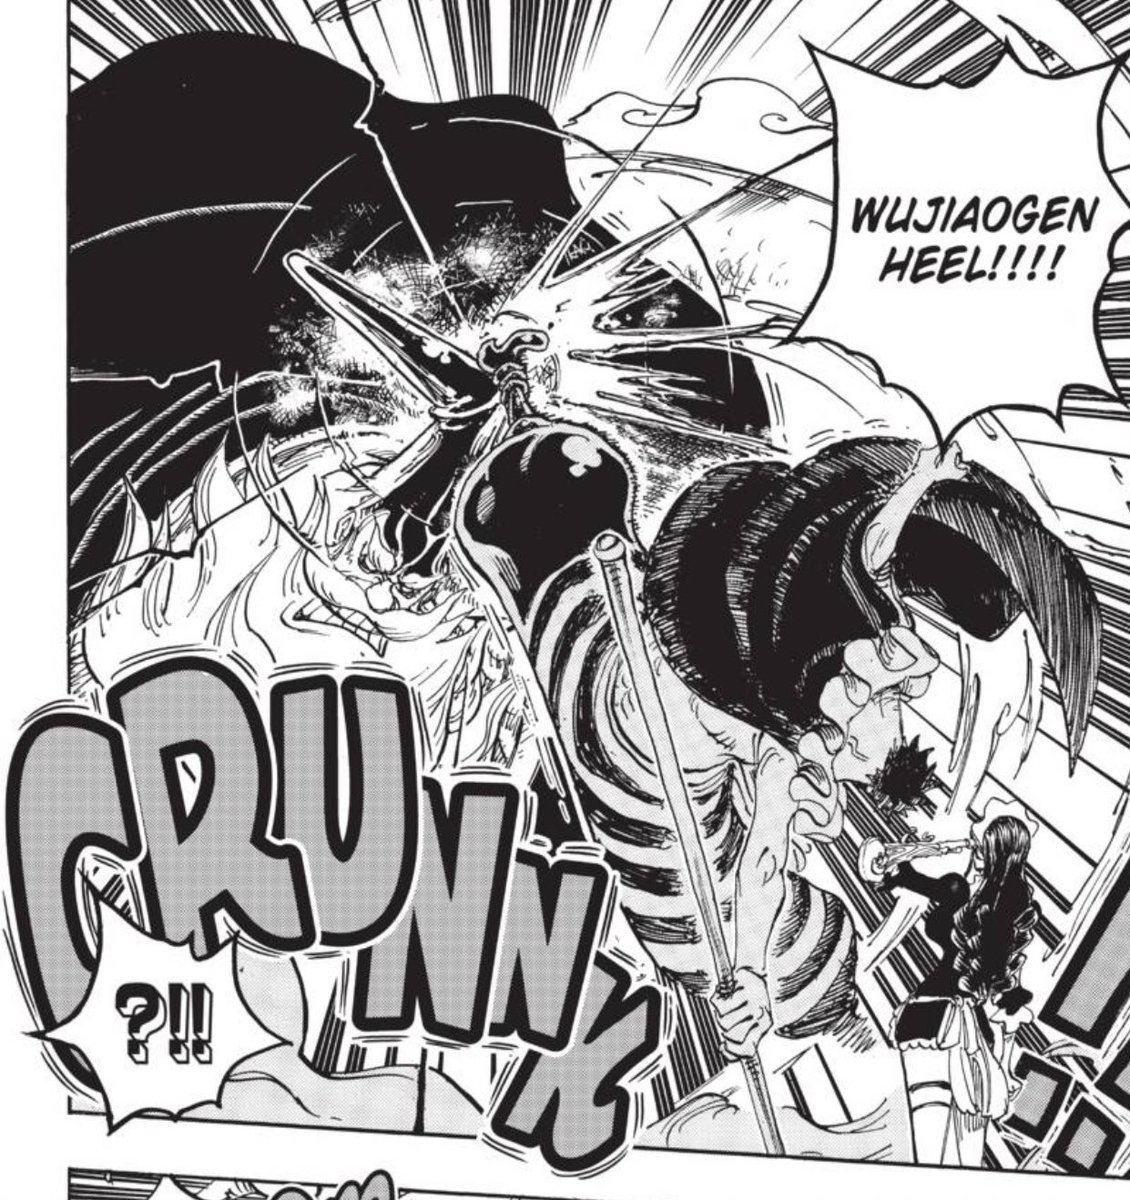 Stabdout Panel - The kicks though, wow. The cracking effect is reminiscent of Whitebeard’s power. I love the shockwave look as it cracks through Lao G and the way Don’s legs form a strong line of action even in the midst of all the spiral/tunnel shape.  #OPGrant